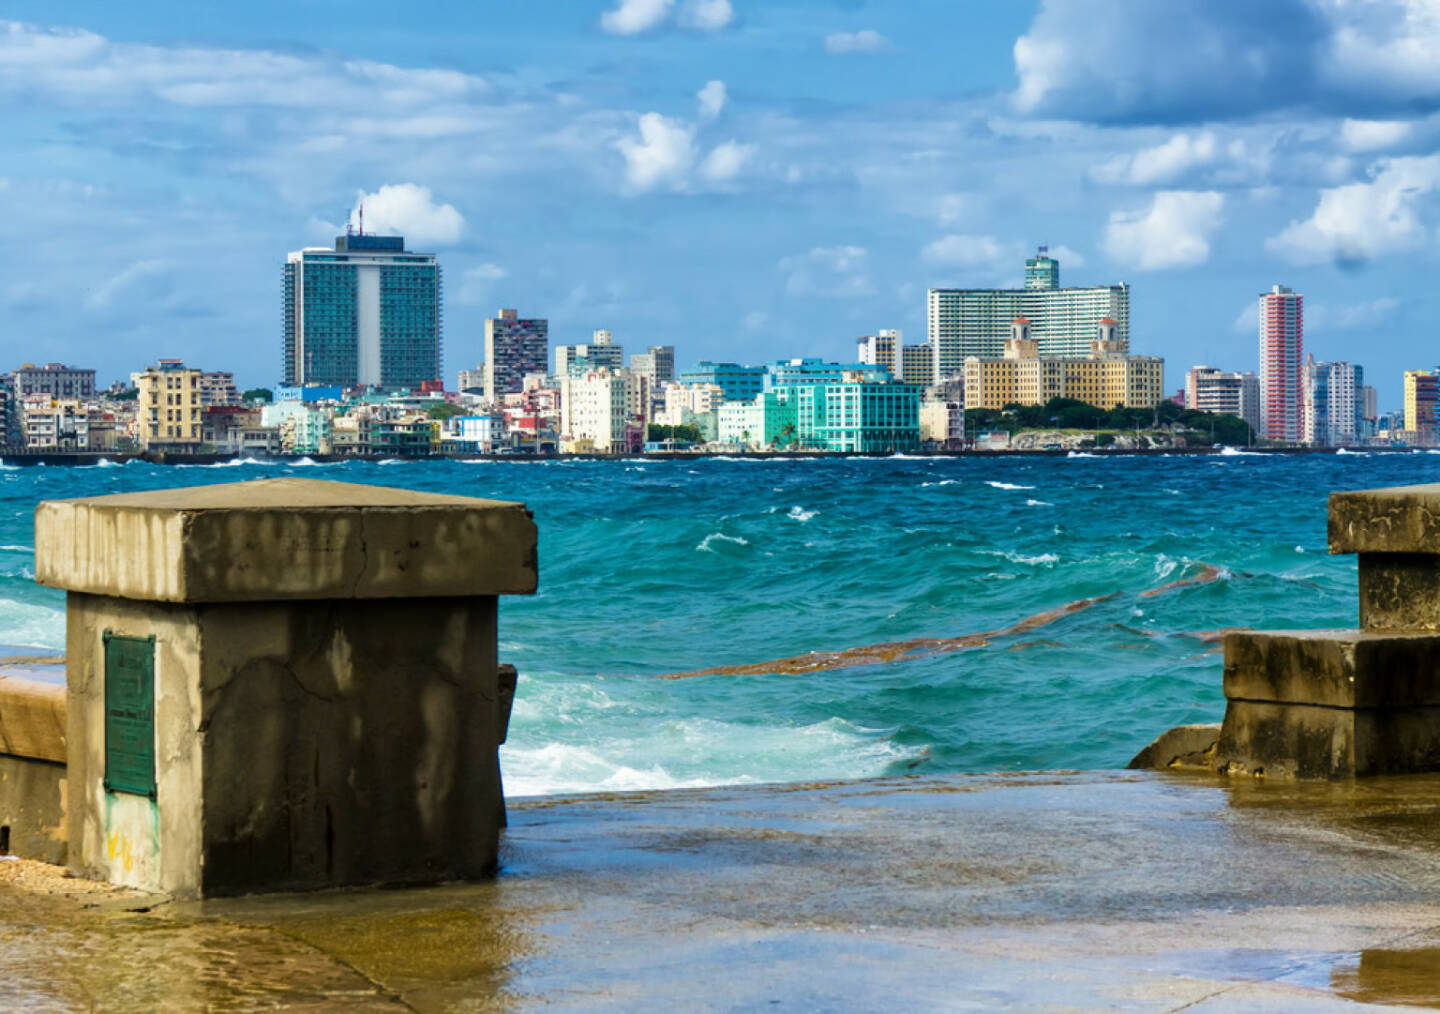 Havanna, Kuba, http://www.shutterstock.com/de/pic-117274624/stock-photo-the-skyline-of-havana-with-a-turbulent-sea-and-el-malecon-in-the-foreground.html